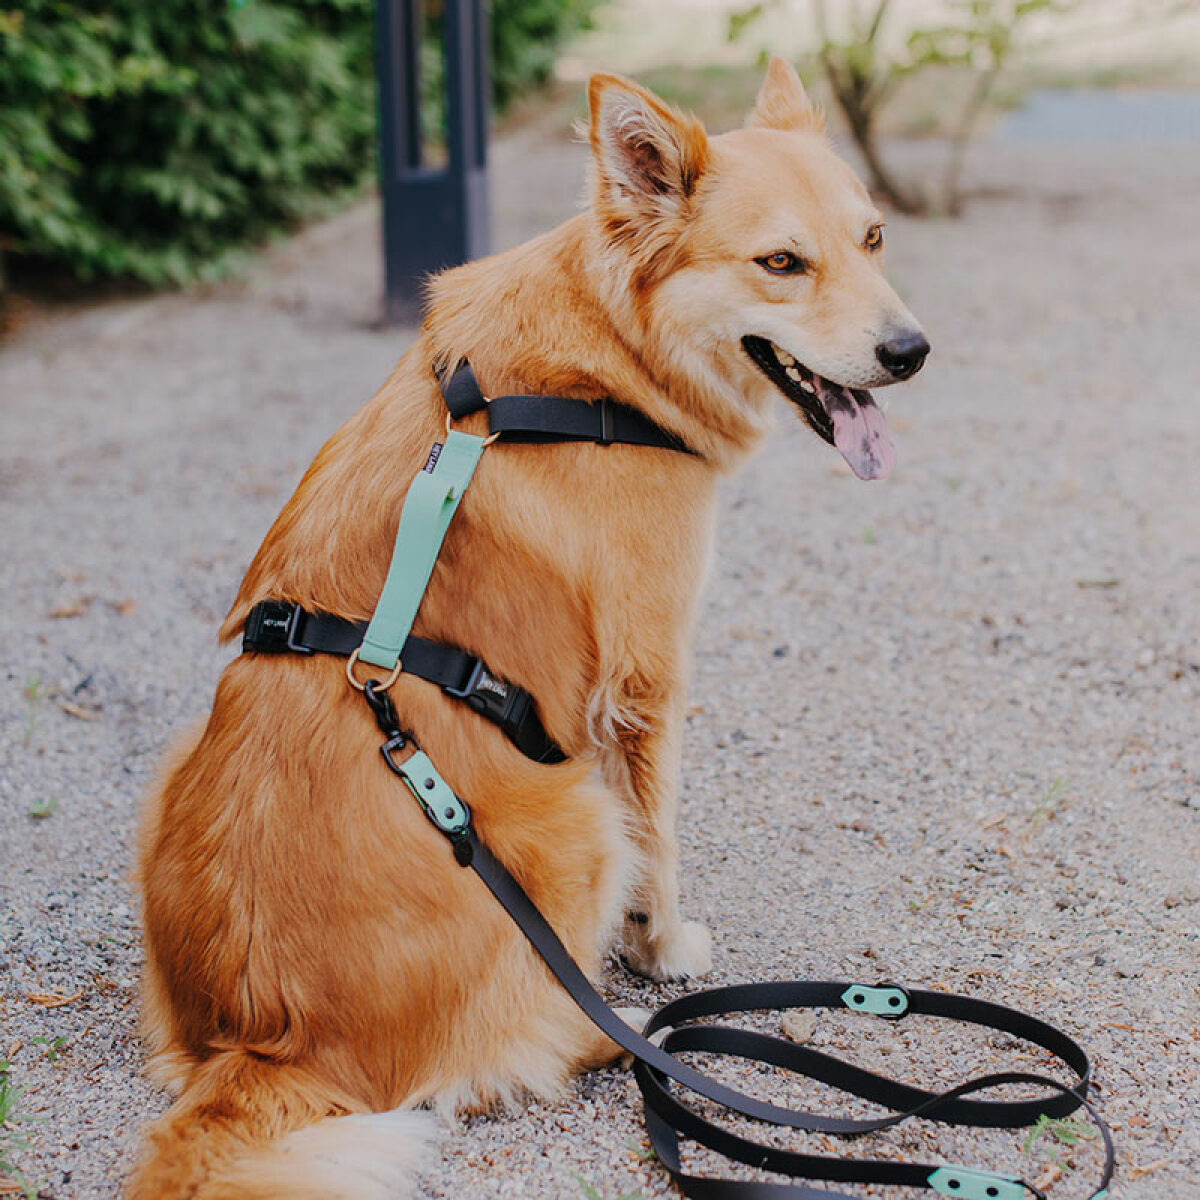 Dog with dog harness outdoor with dog leash in black/mint